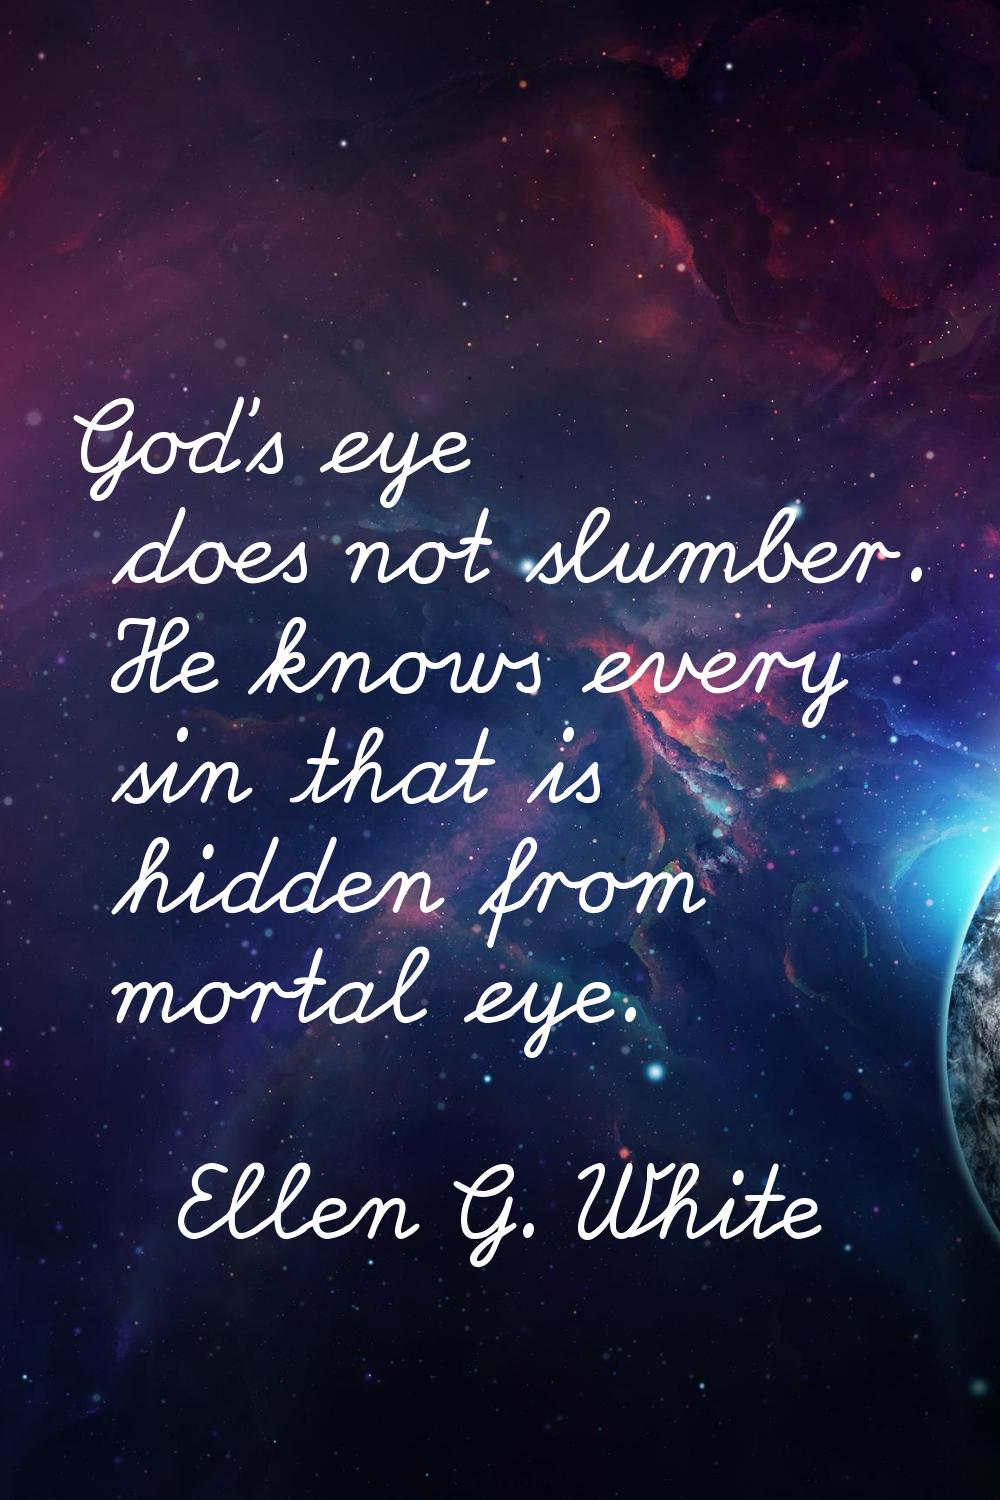 God's eye does not slumber. He knows every sin that is hidden from mortal eye.